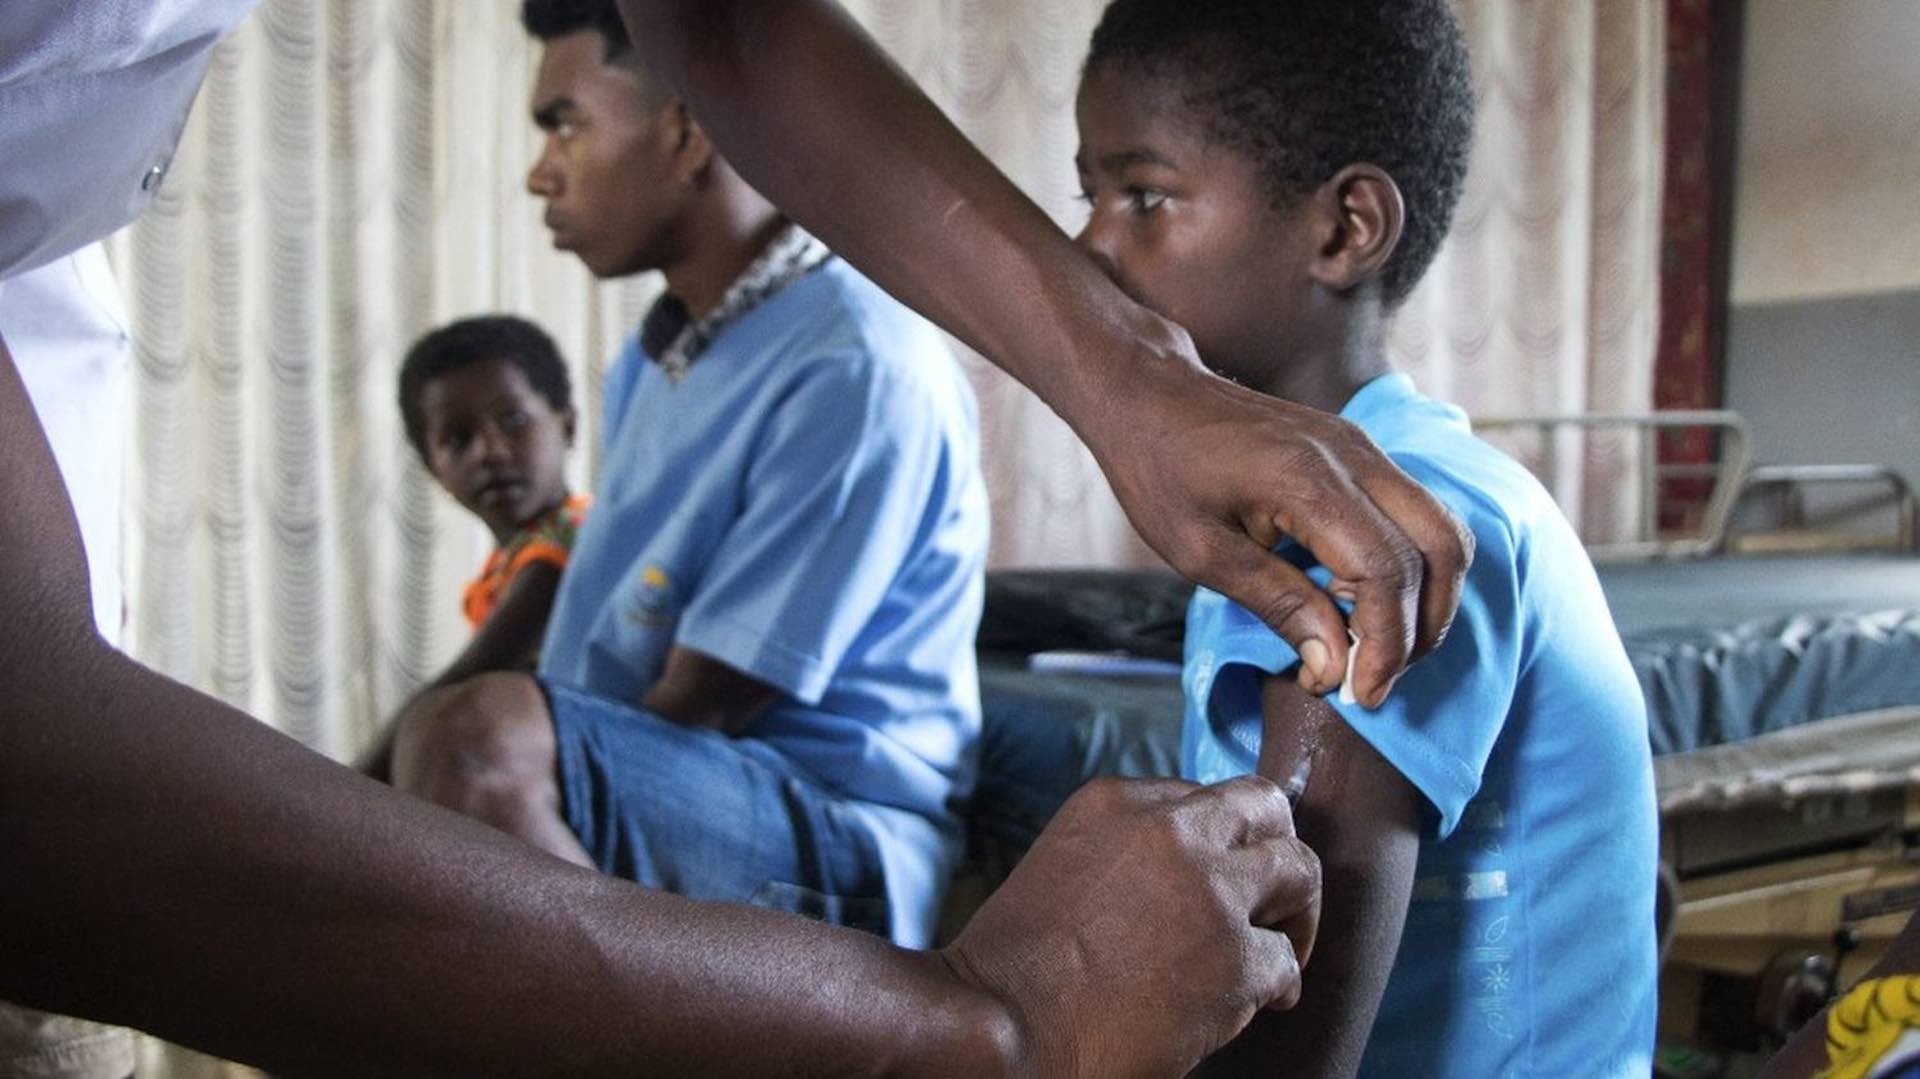 In two weeks, over 150 children have died from measles in Zimbabwe